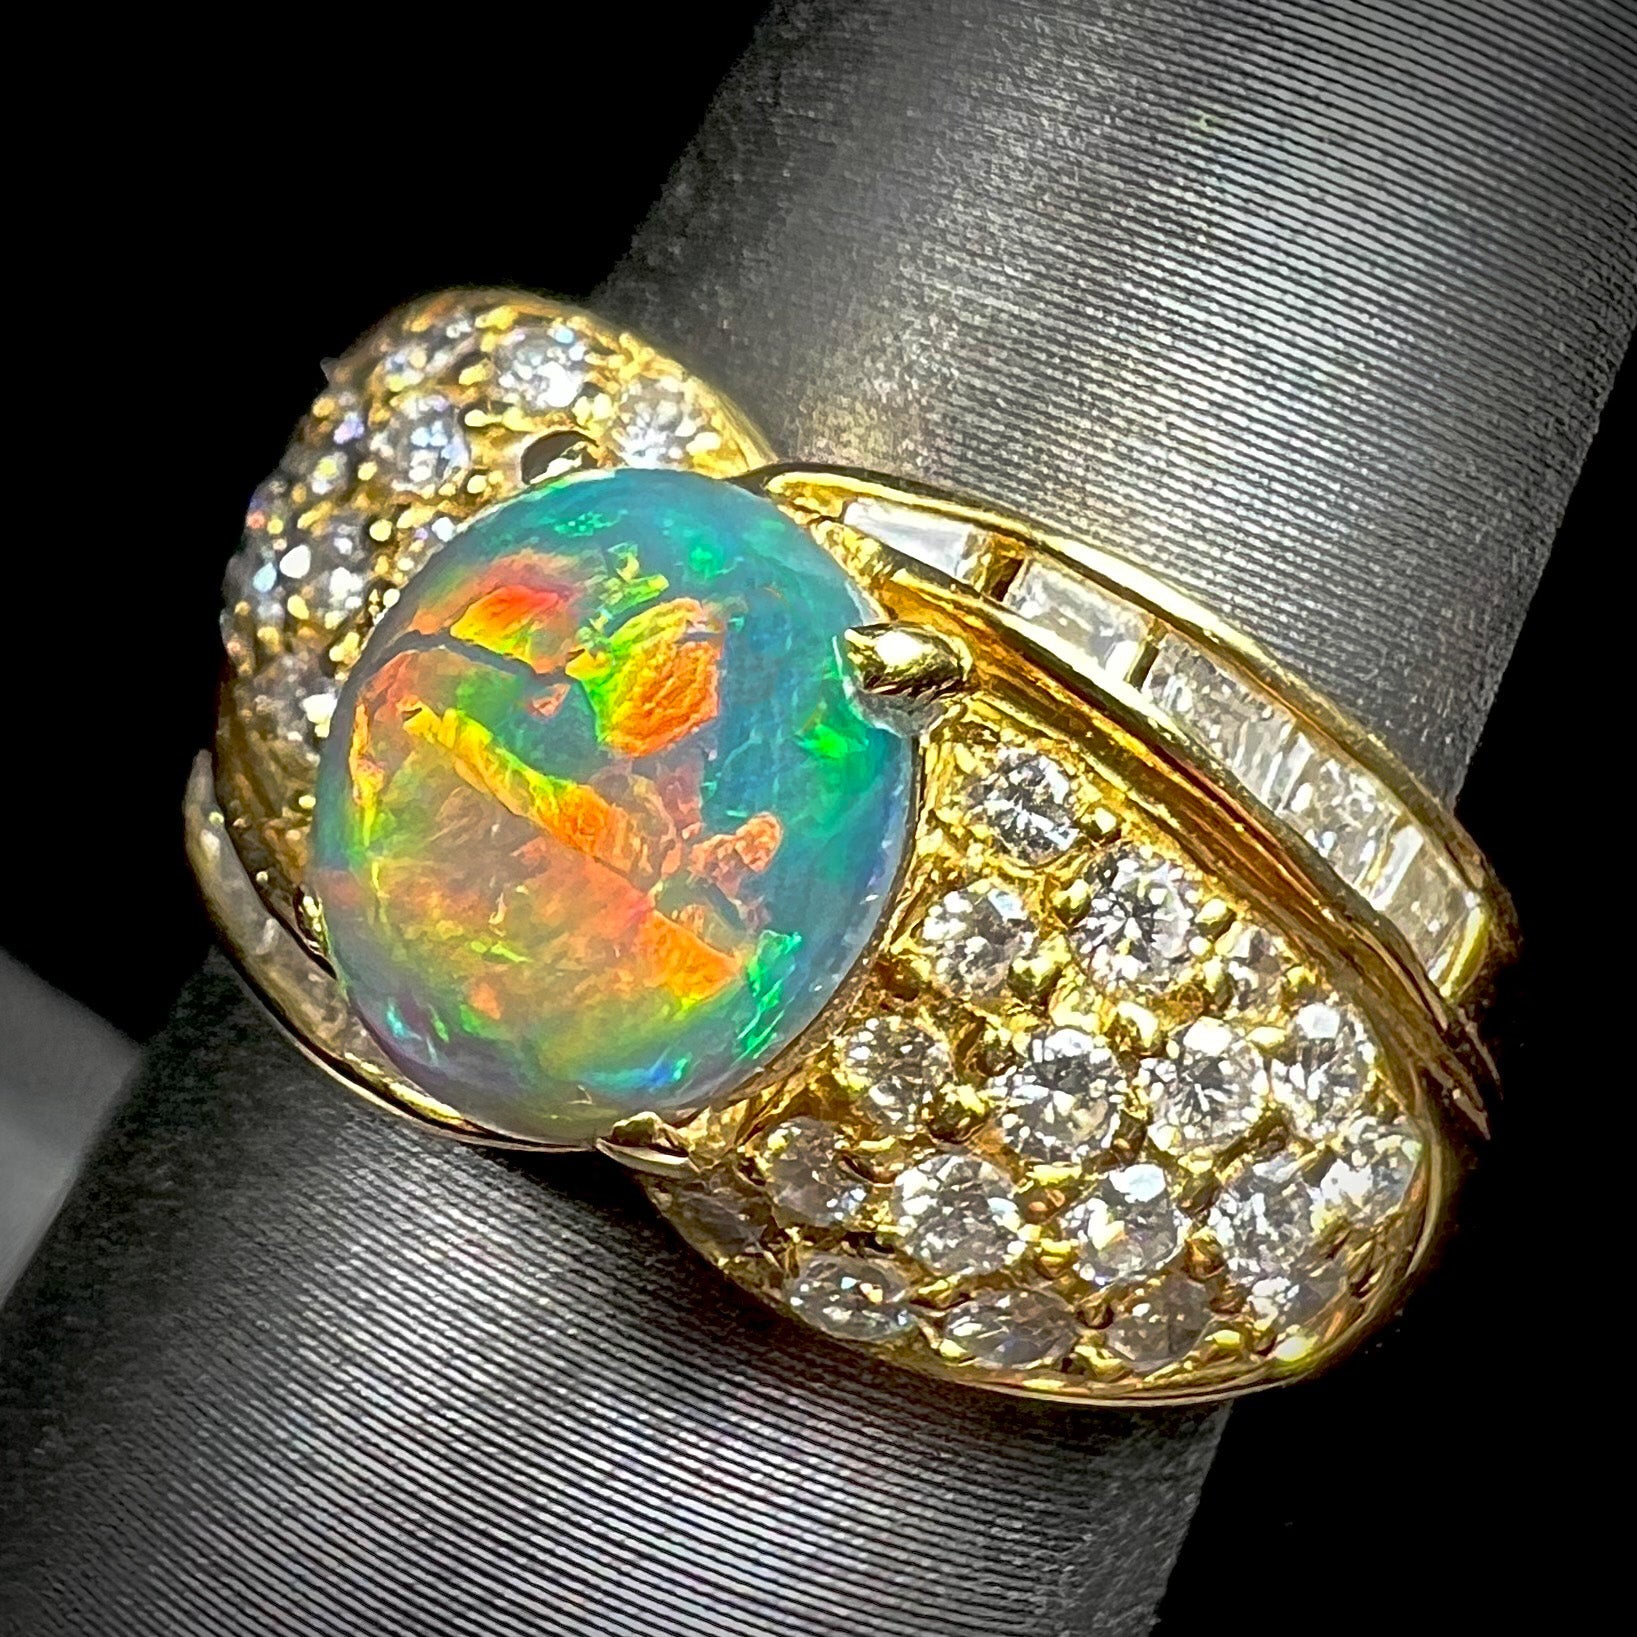 Milky Pink Vintage Crystal Opal Ring – Fetheray